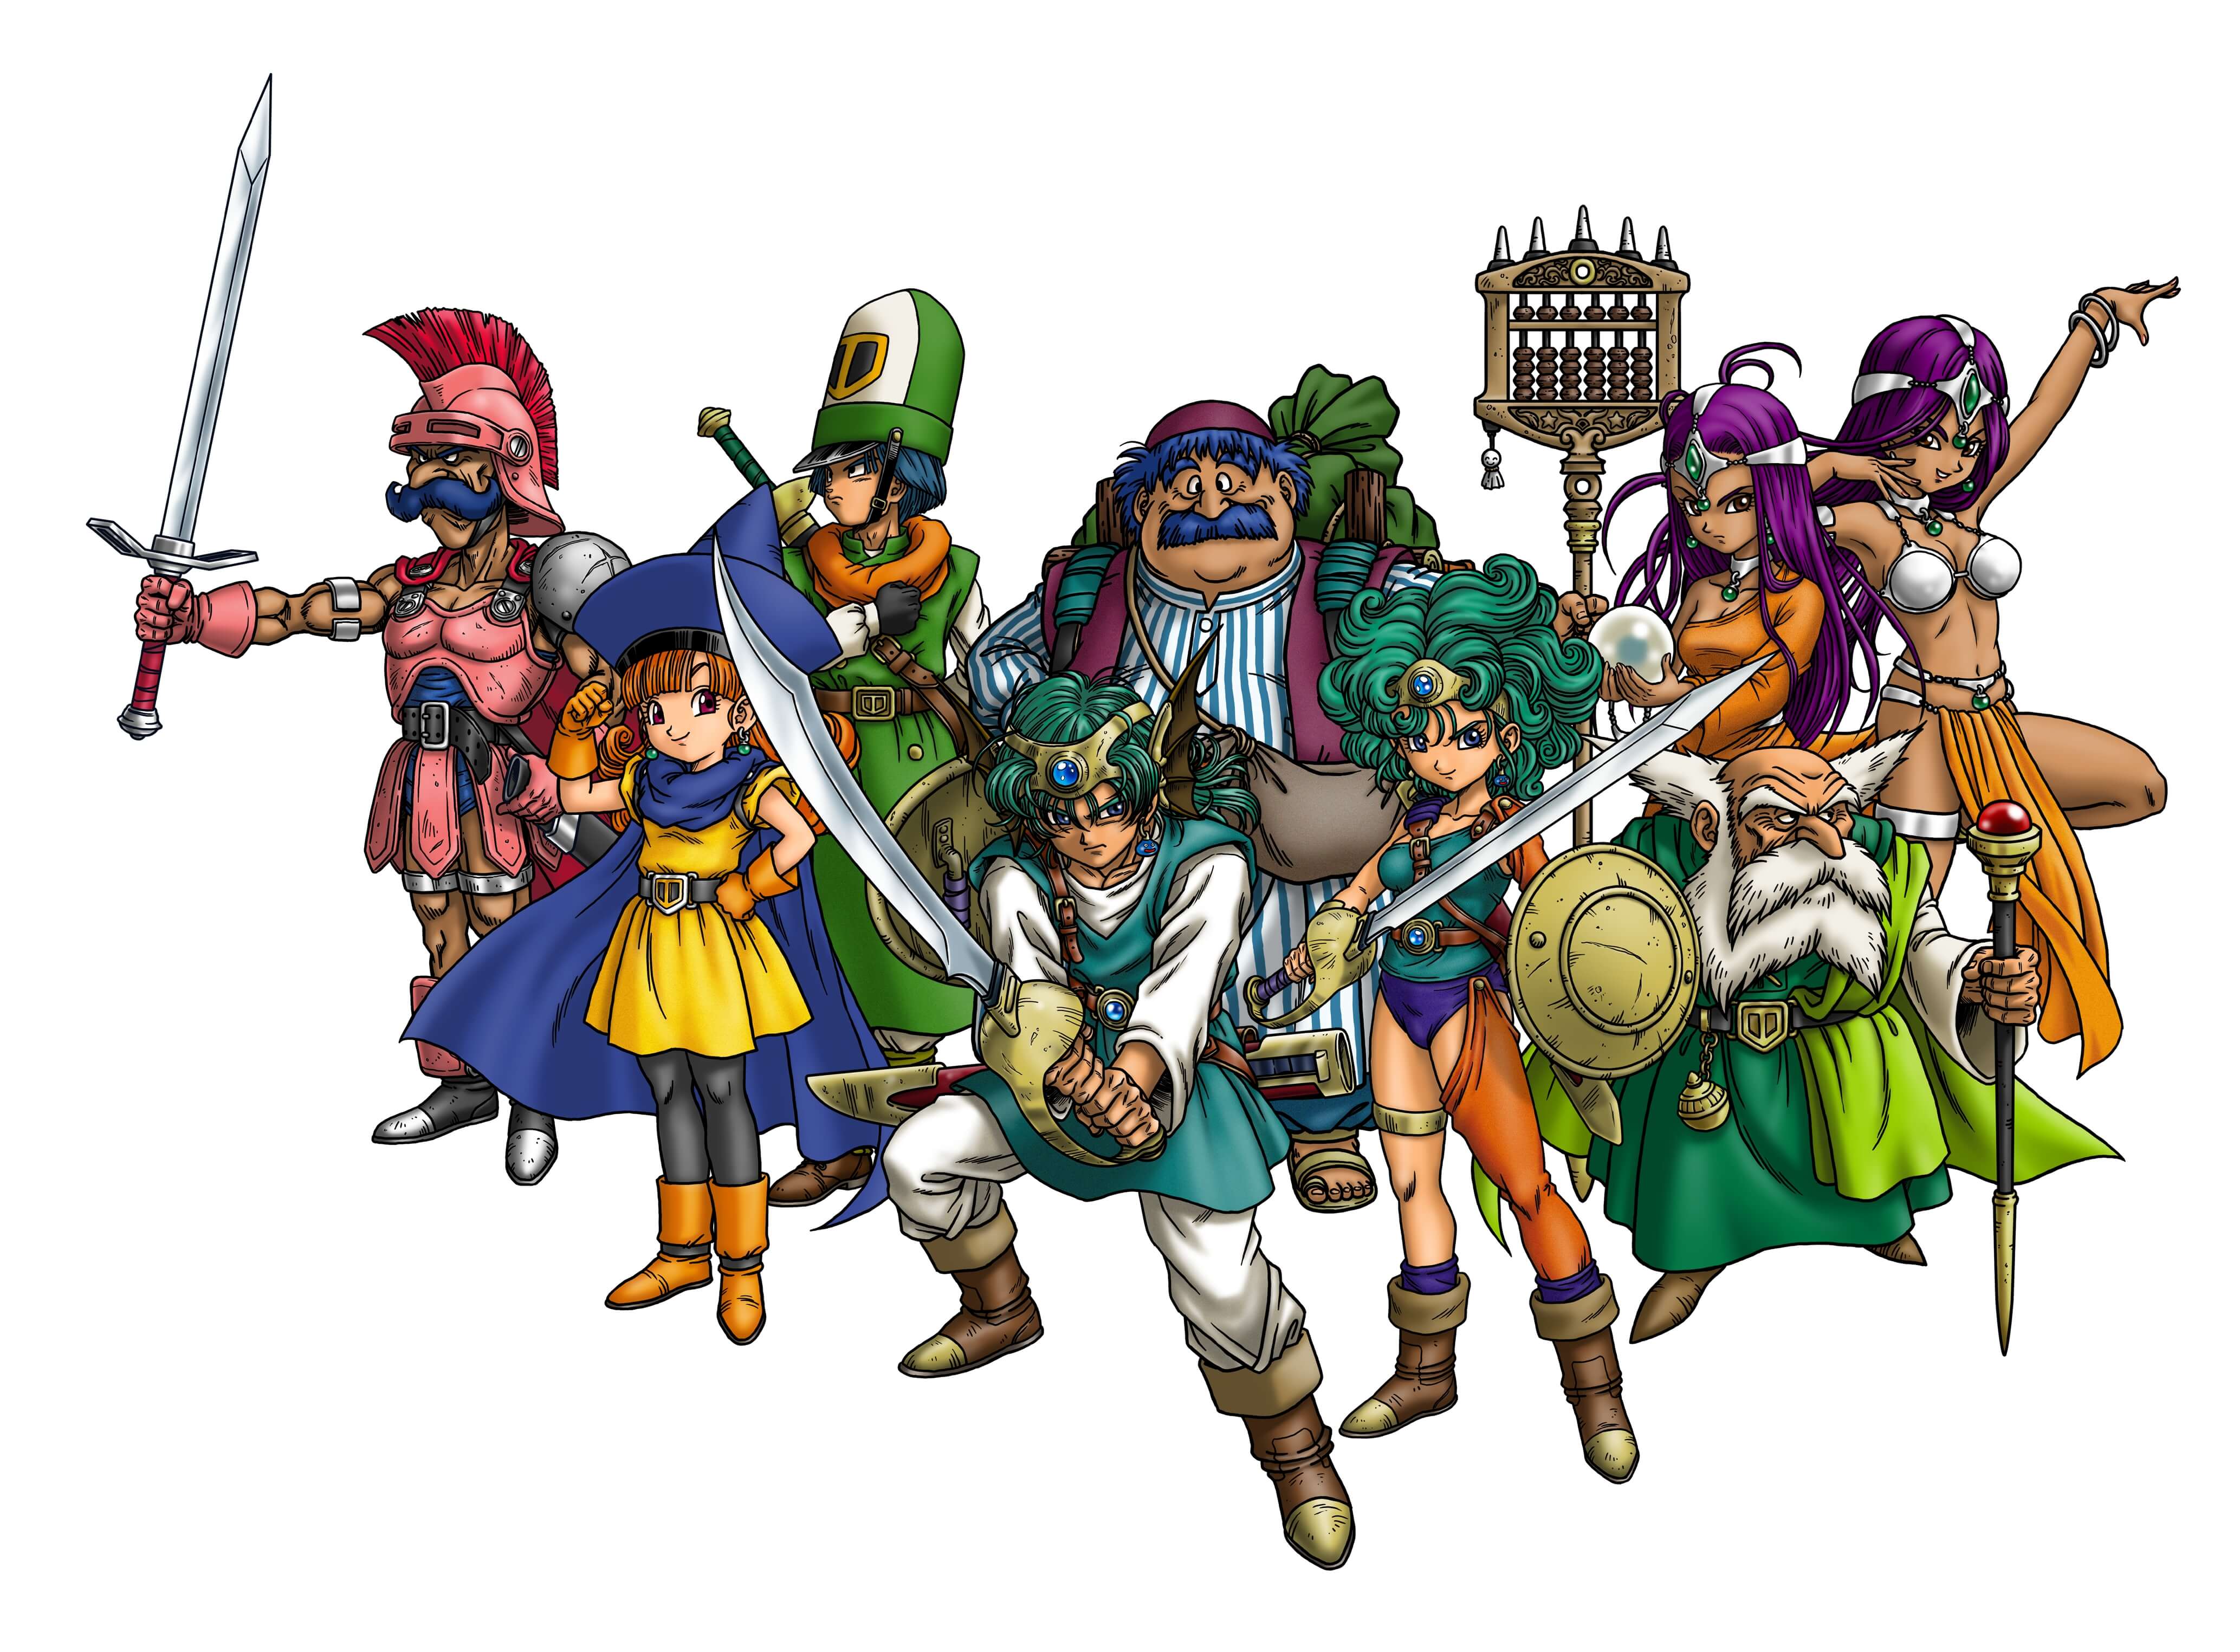 In Dragon Quest IV, Is playing the tag-mode mini game necessary to expand the Pioneer Town?